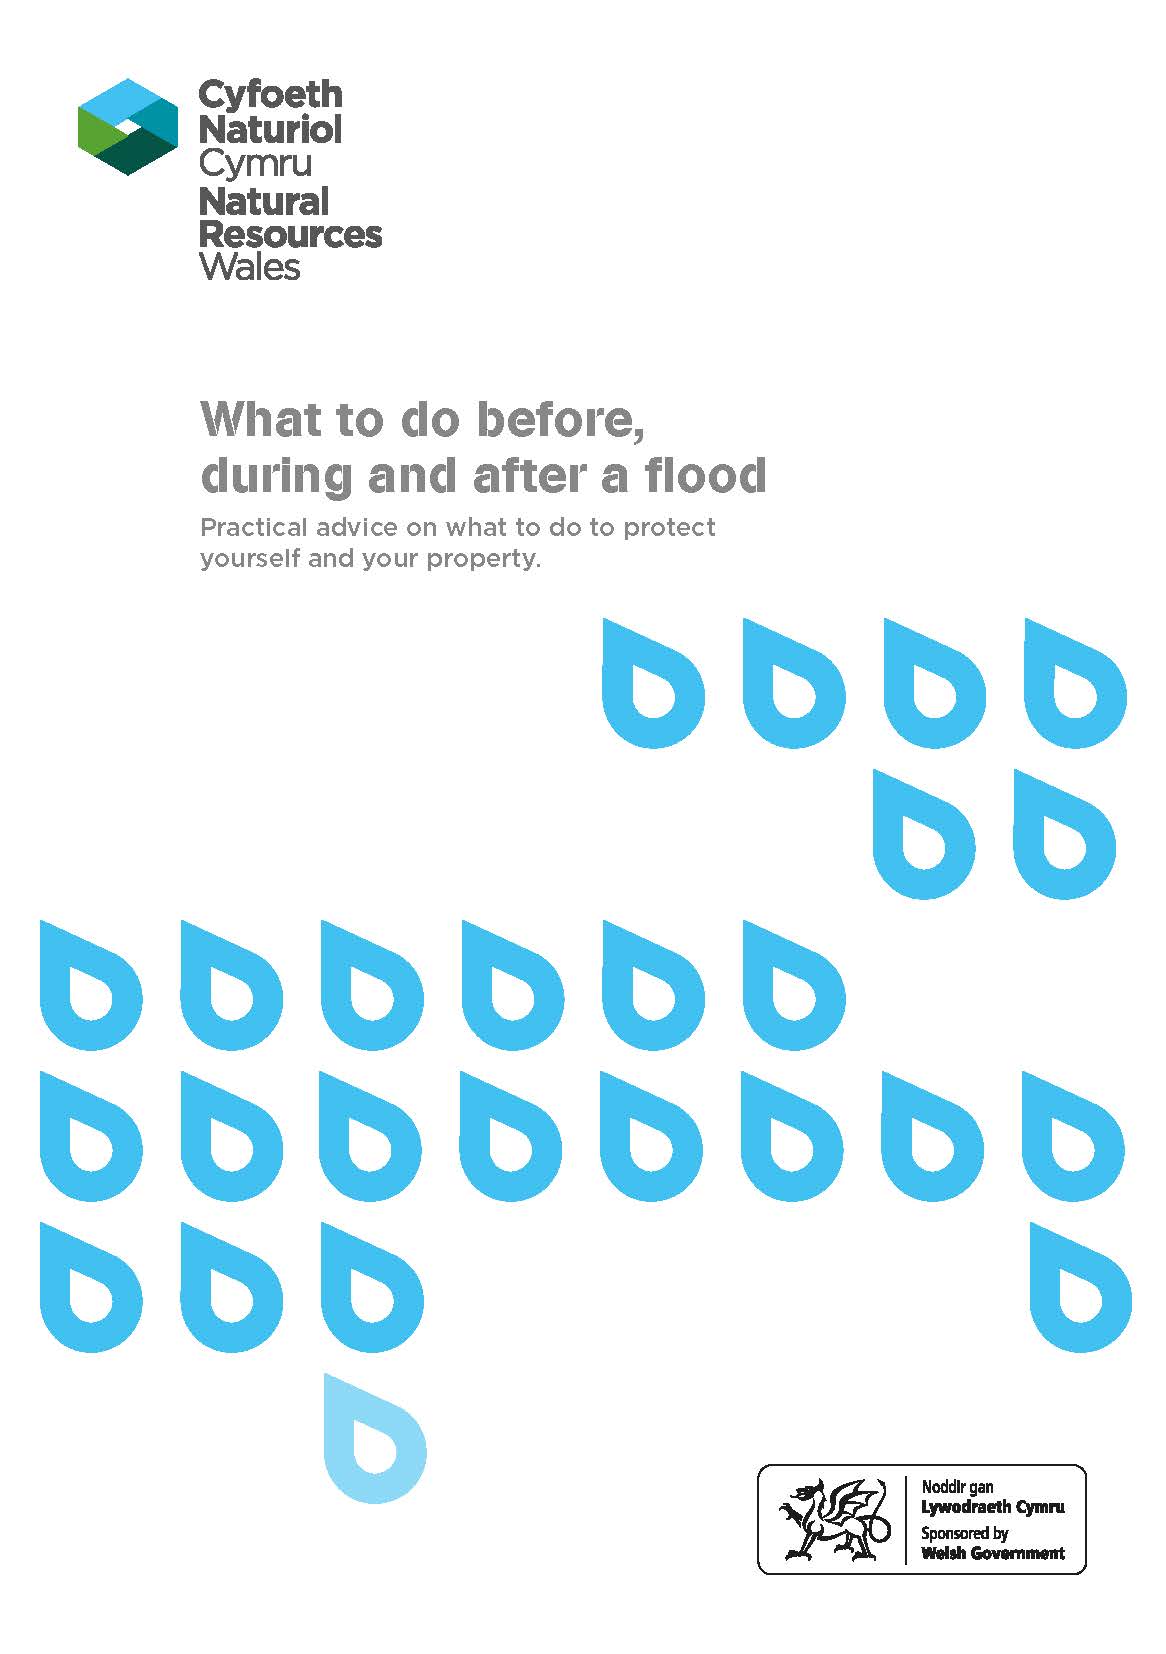 Front page of 'What to do before, during and after a flood' leaflet